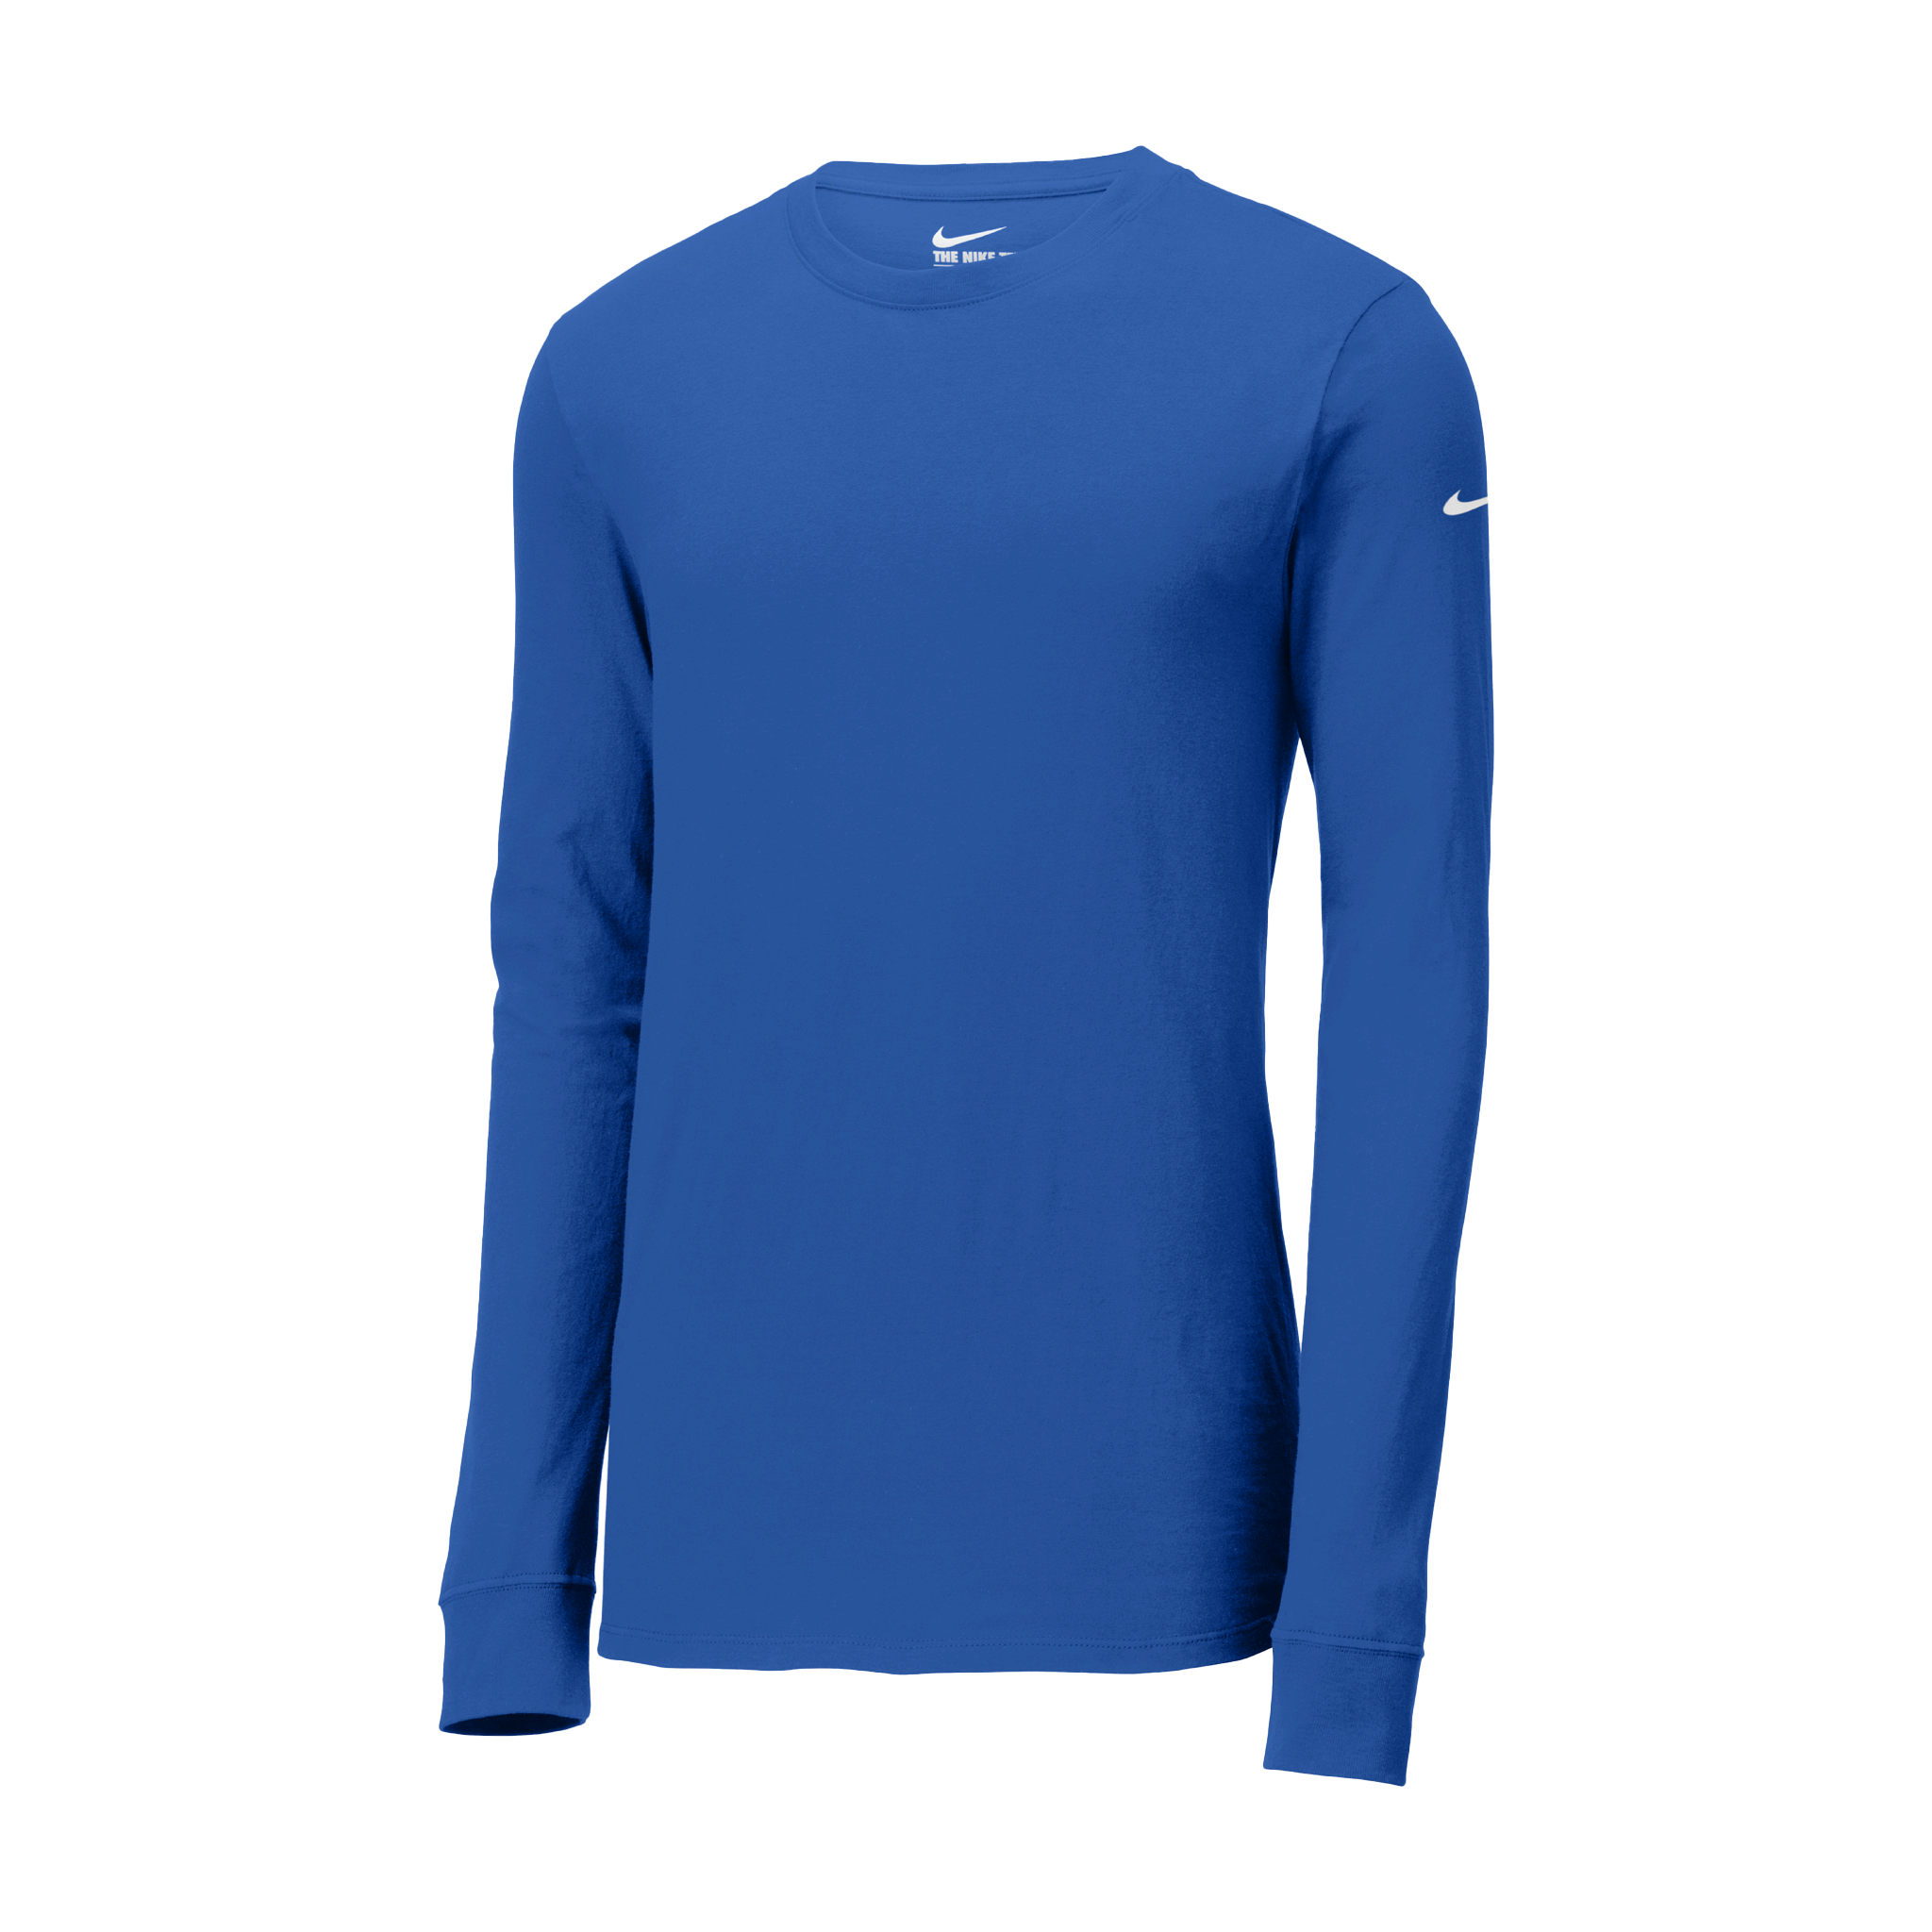 Core Cotton Long Sleeve Tee - Brights